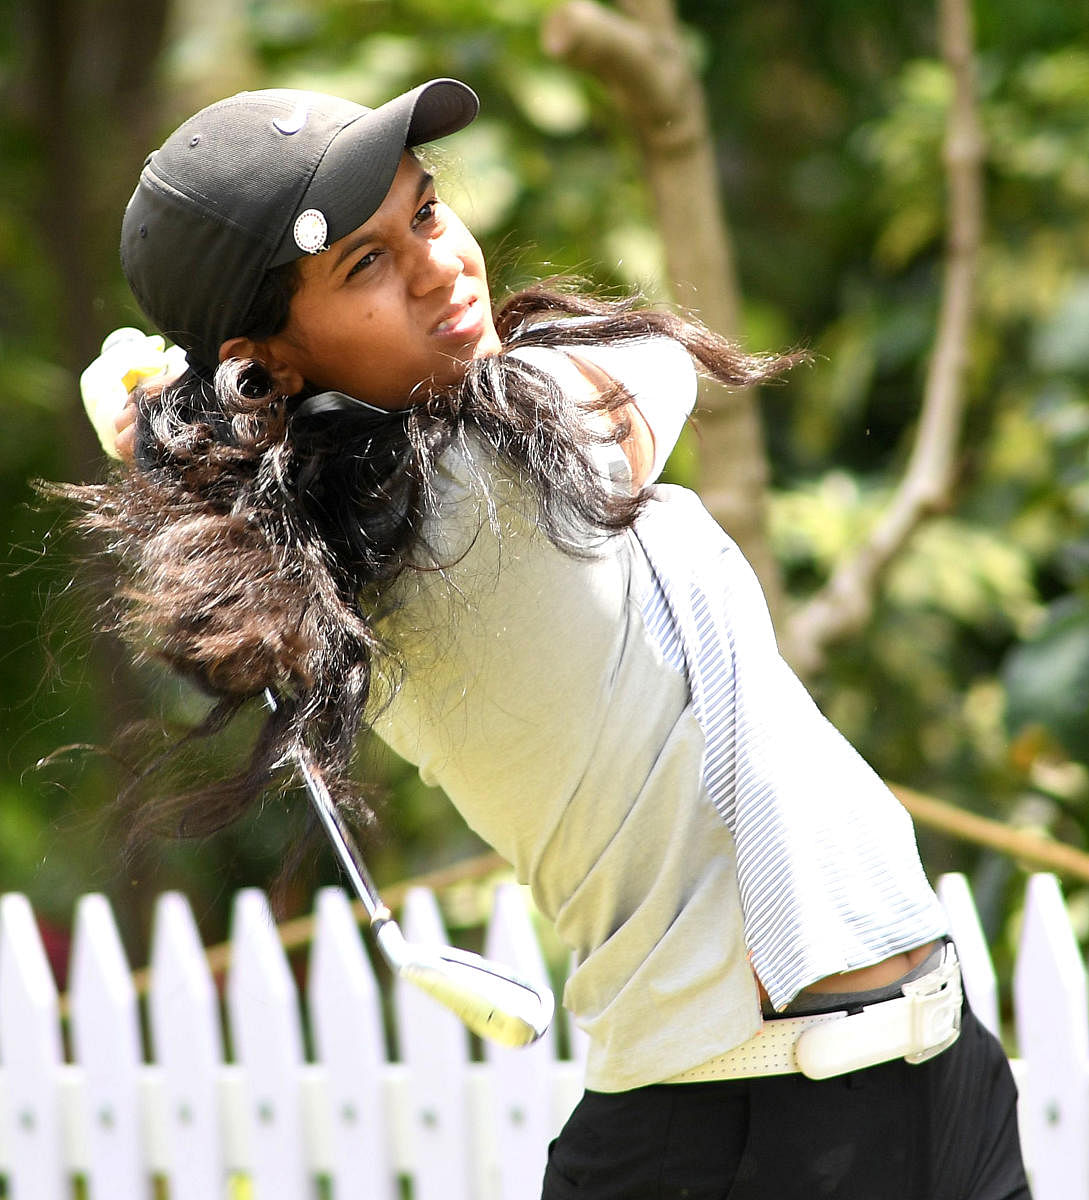 While Rahul Ganapathy was the first one to put Mysuru on national golfing scene, Pranavi Urs is the latest to carry forward that legacy. DH Photos/ Srikanta Sharma